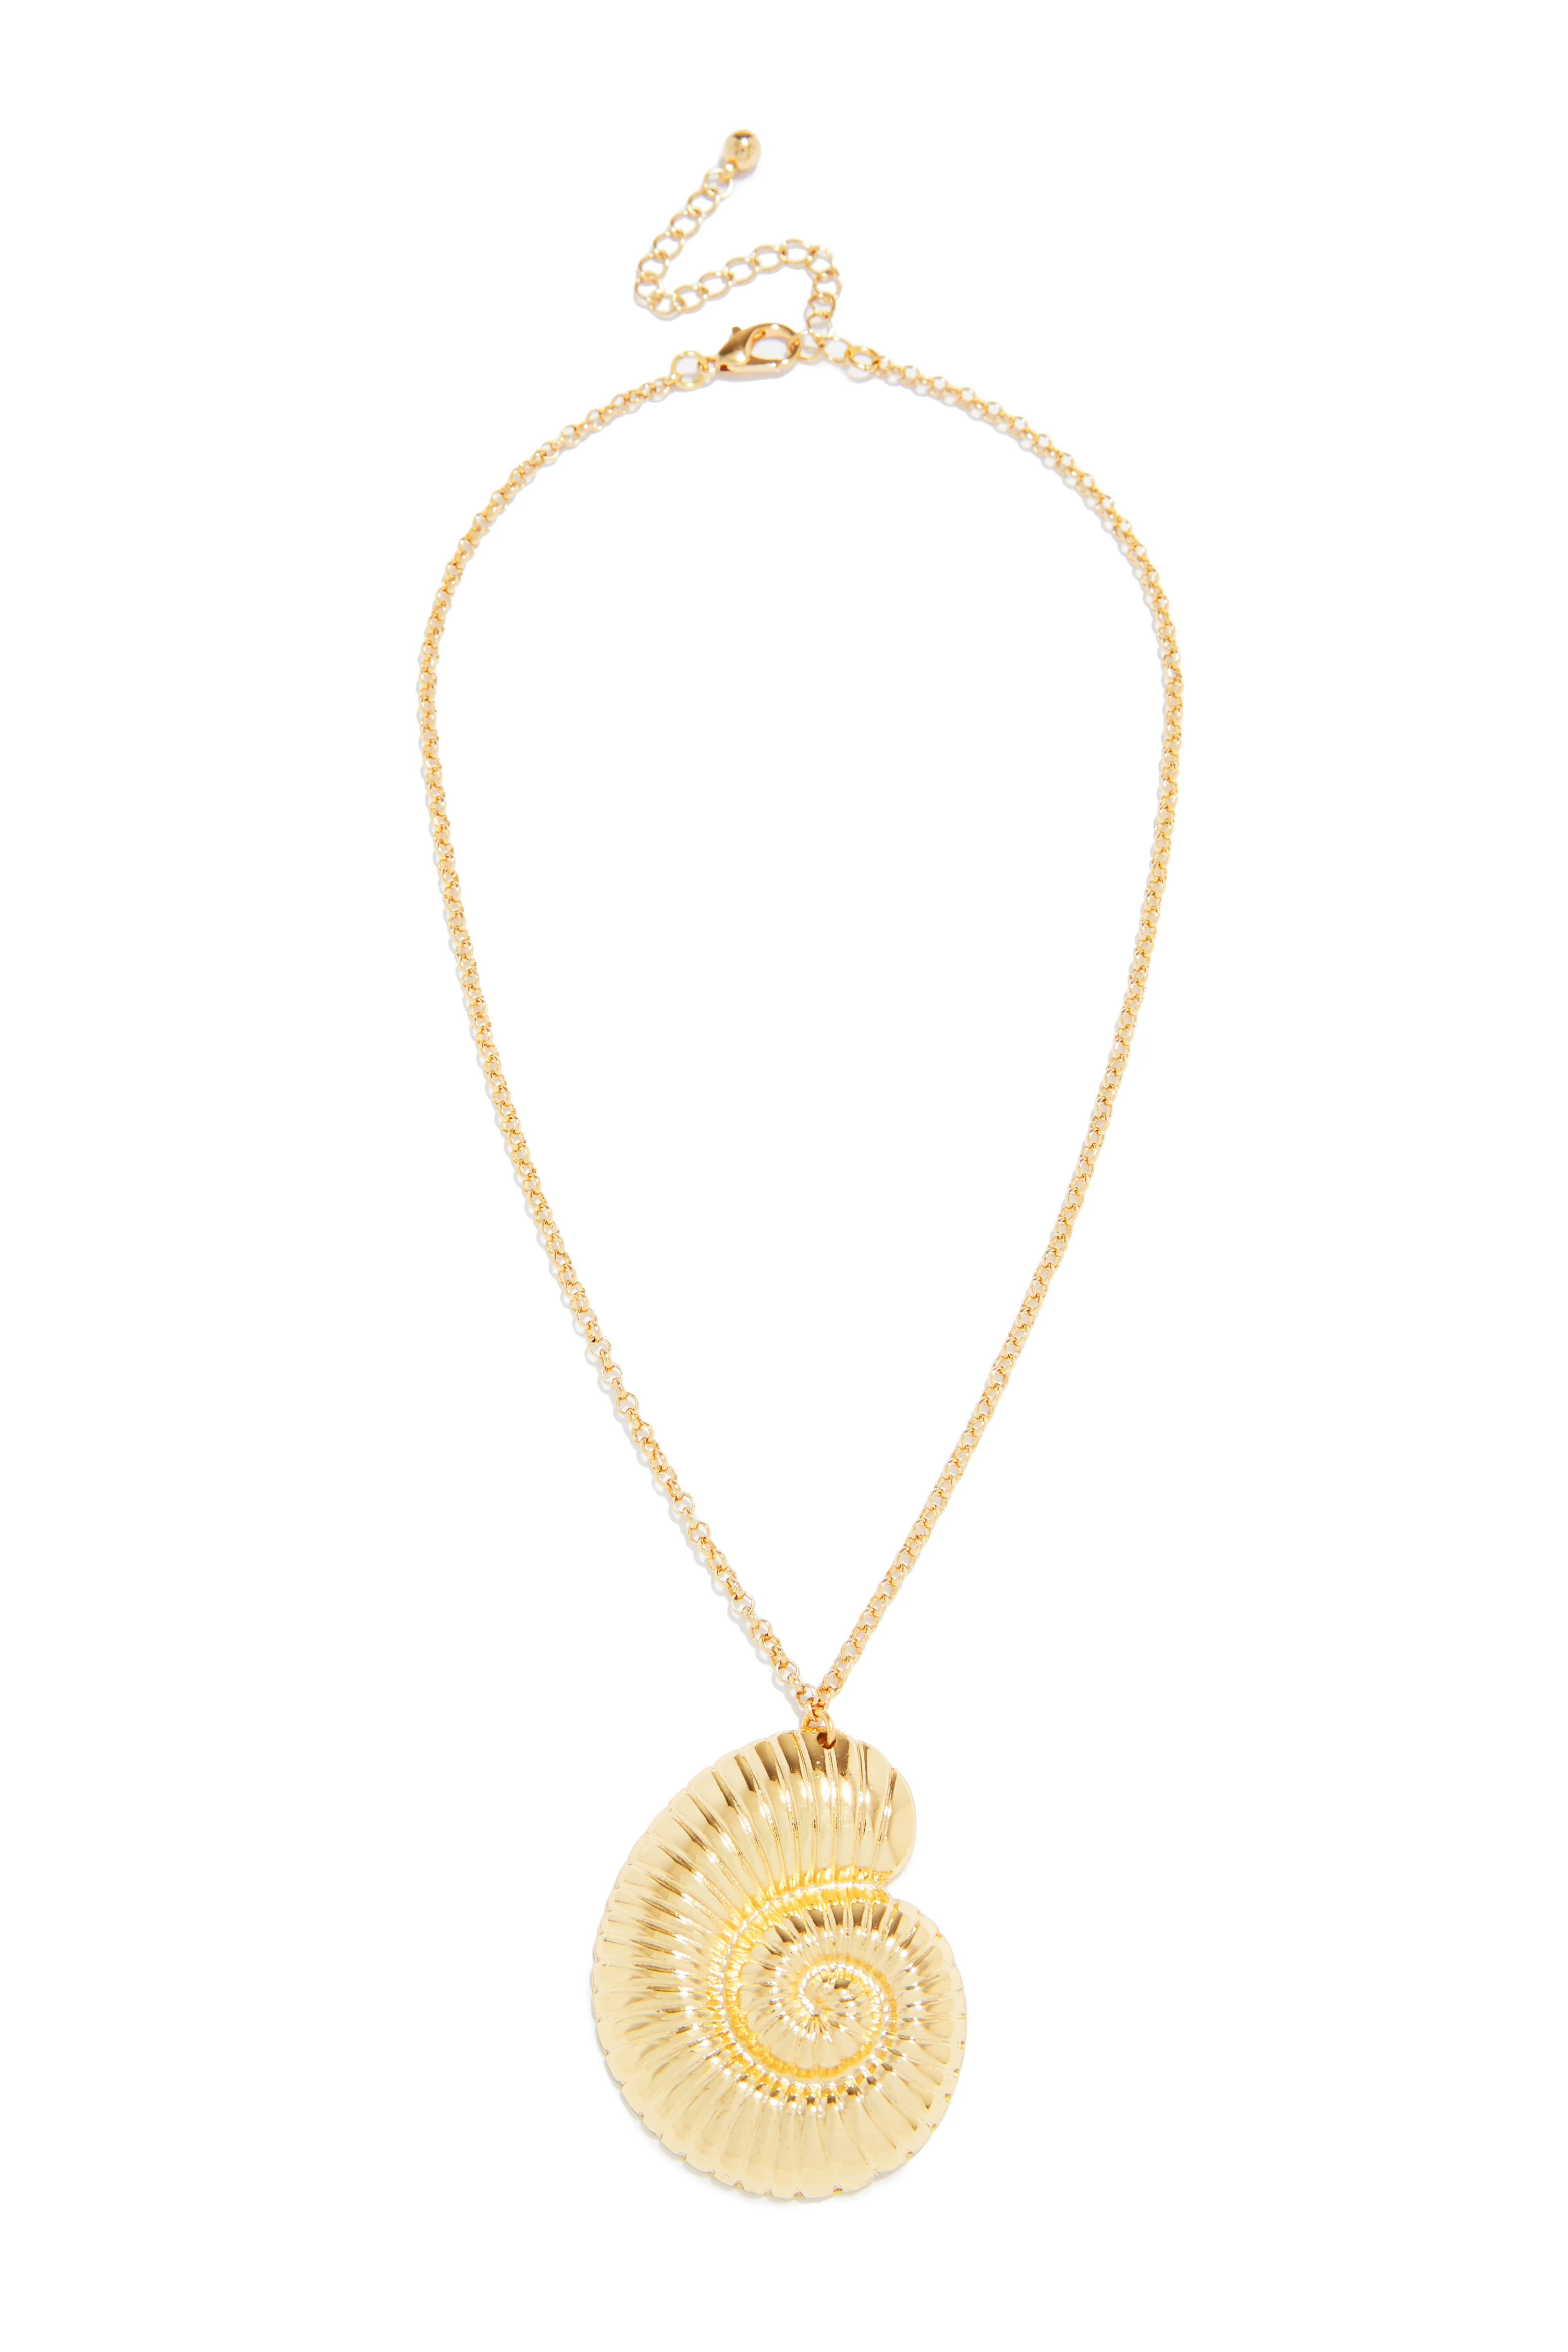 Miss Lola | Gold Waves Shell Statement Necklace Gold | MISS LOLA